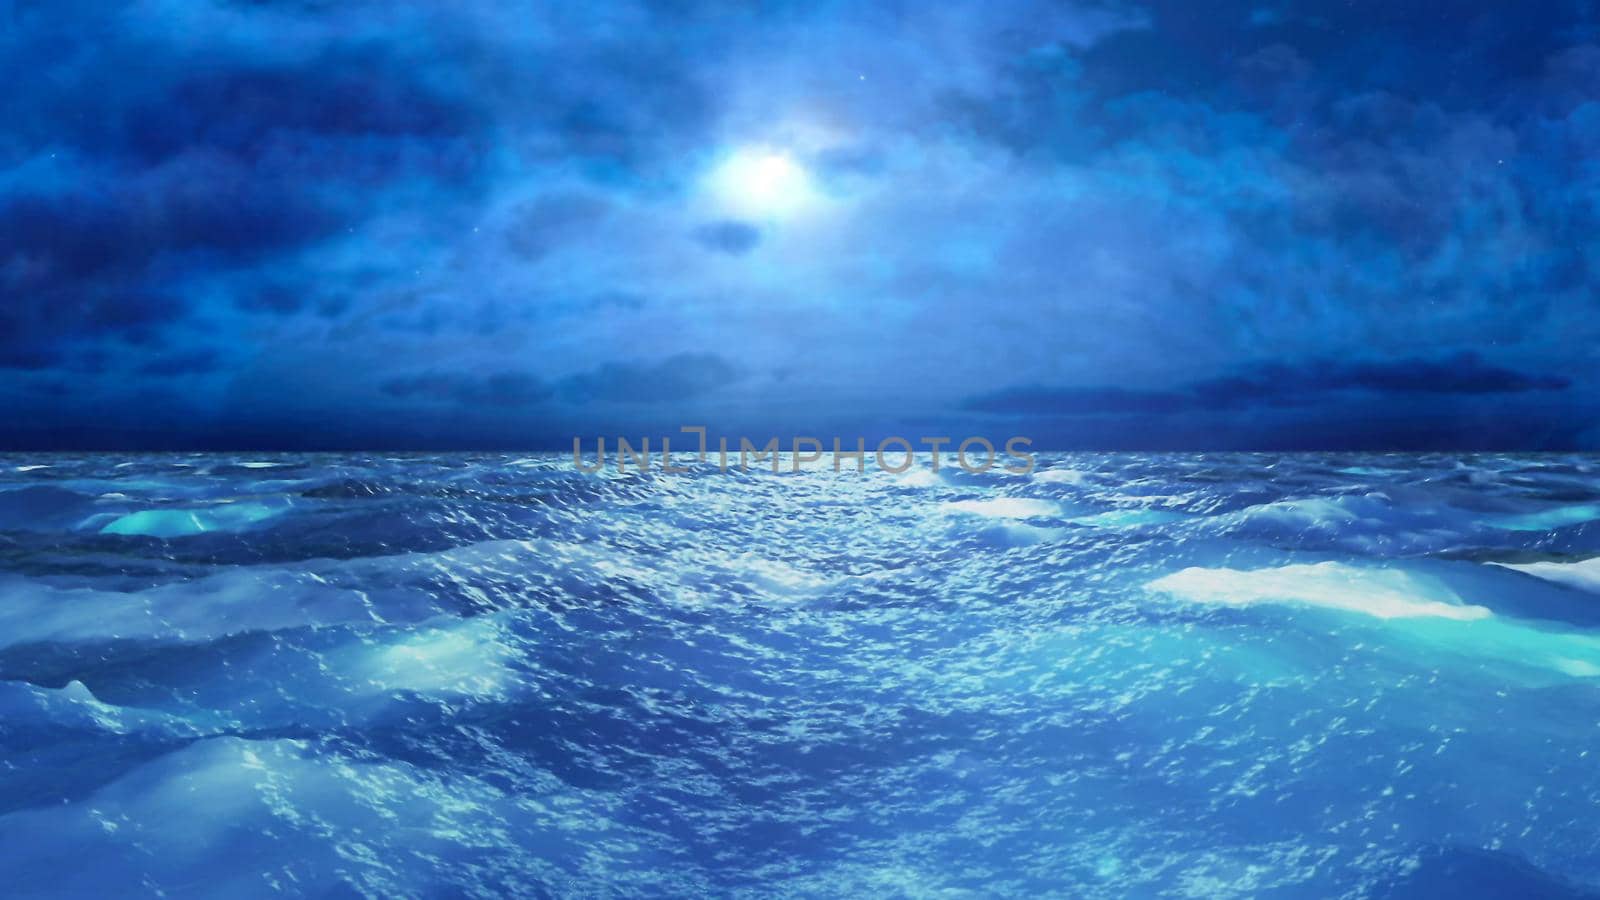 Realistic Stormy Sea at Night, Abstract Background 3D rendering by designprojects